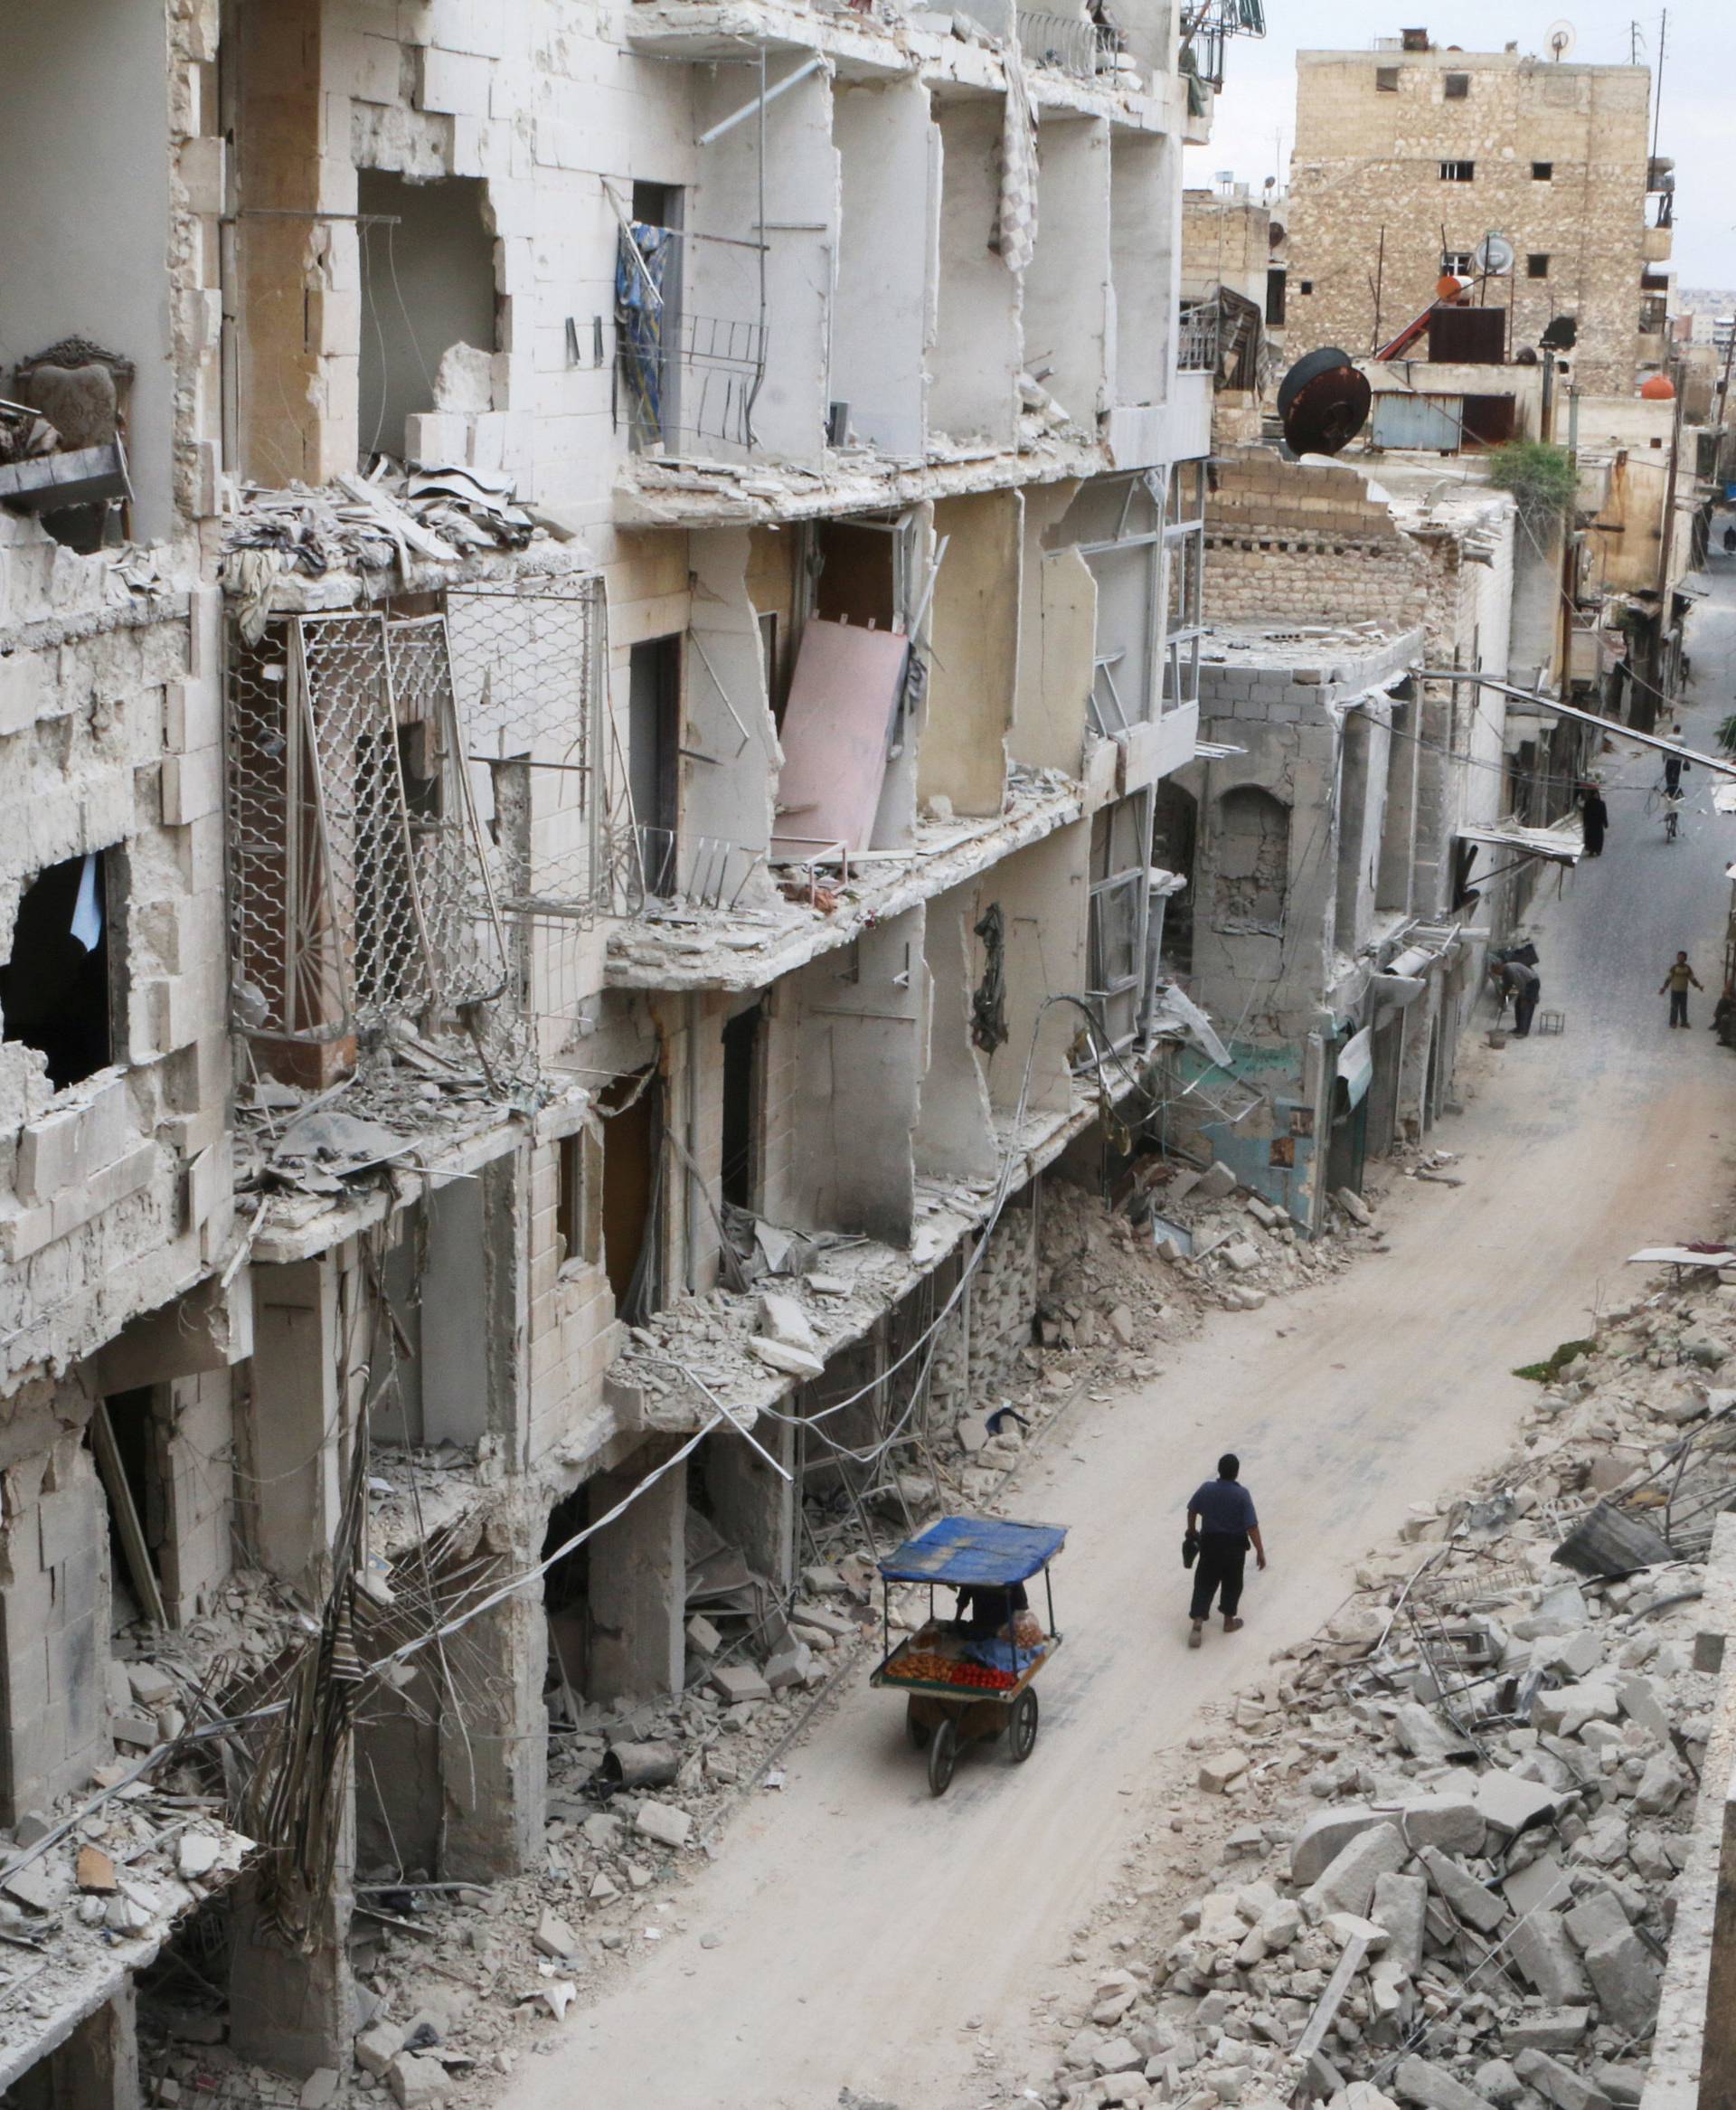 Residents walk near damaged buildings in the rebel held area of Old Aleppo